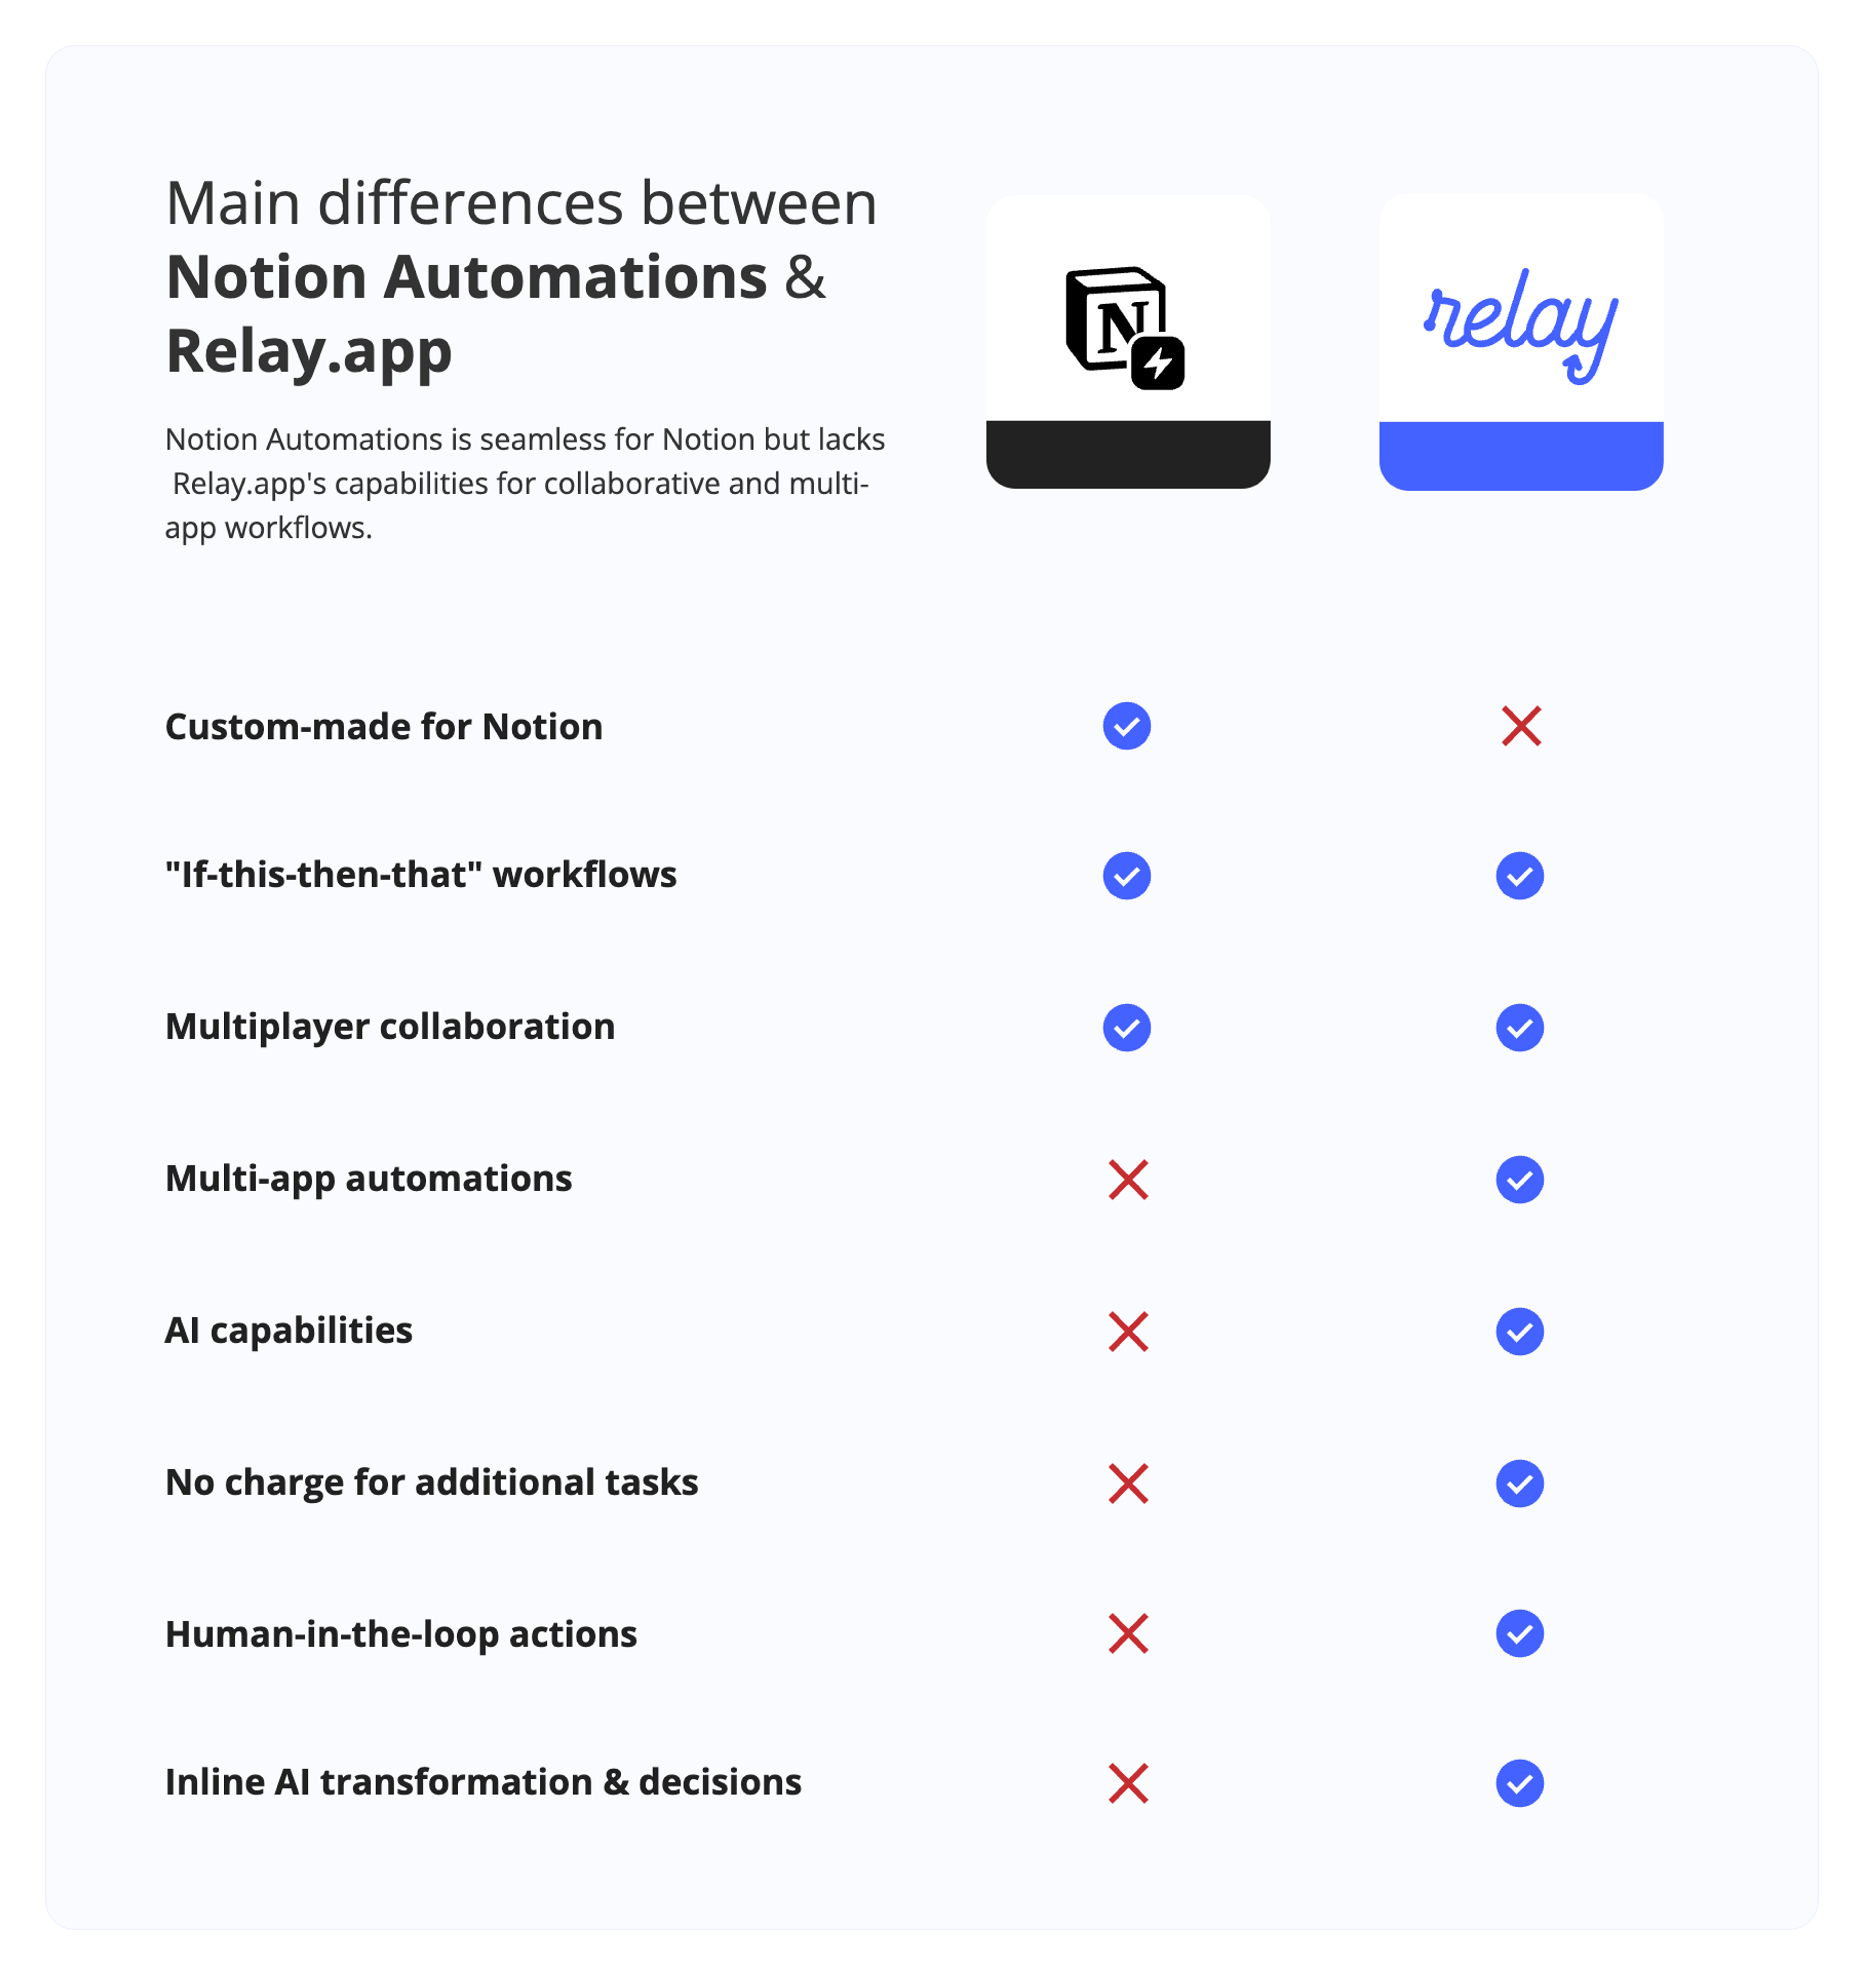 Notions Automations vs Relay.app features